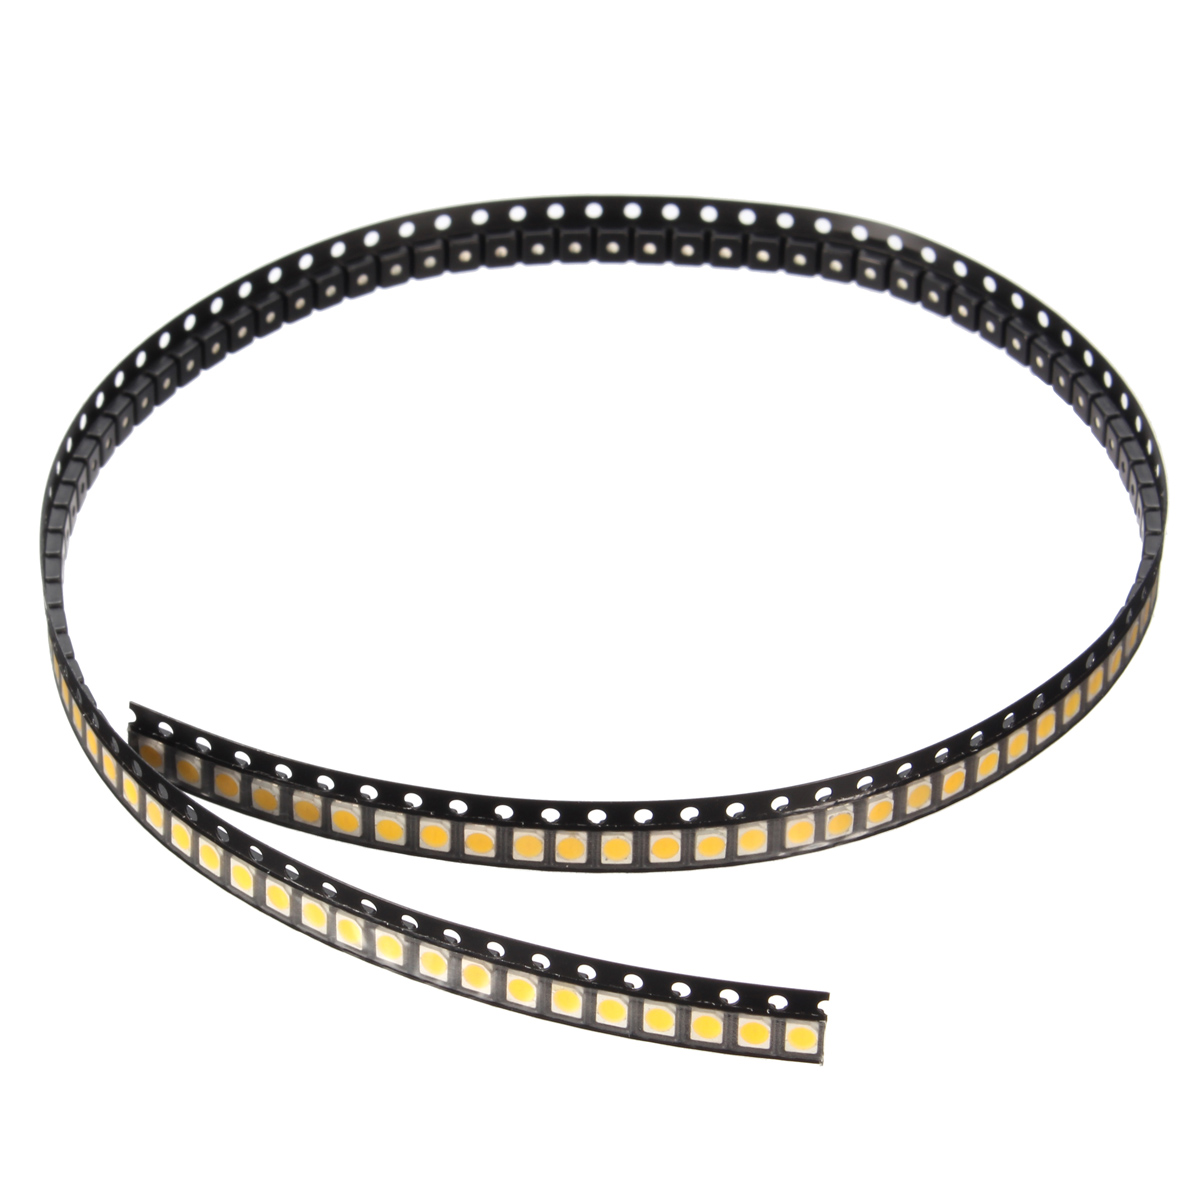 100PCS-SMD3528-1210-1W-100LM-Warm-White-LED-Backlight-DIY-Chip-Bead-For-TV-Application-1128676-1